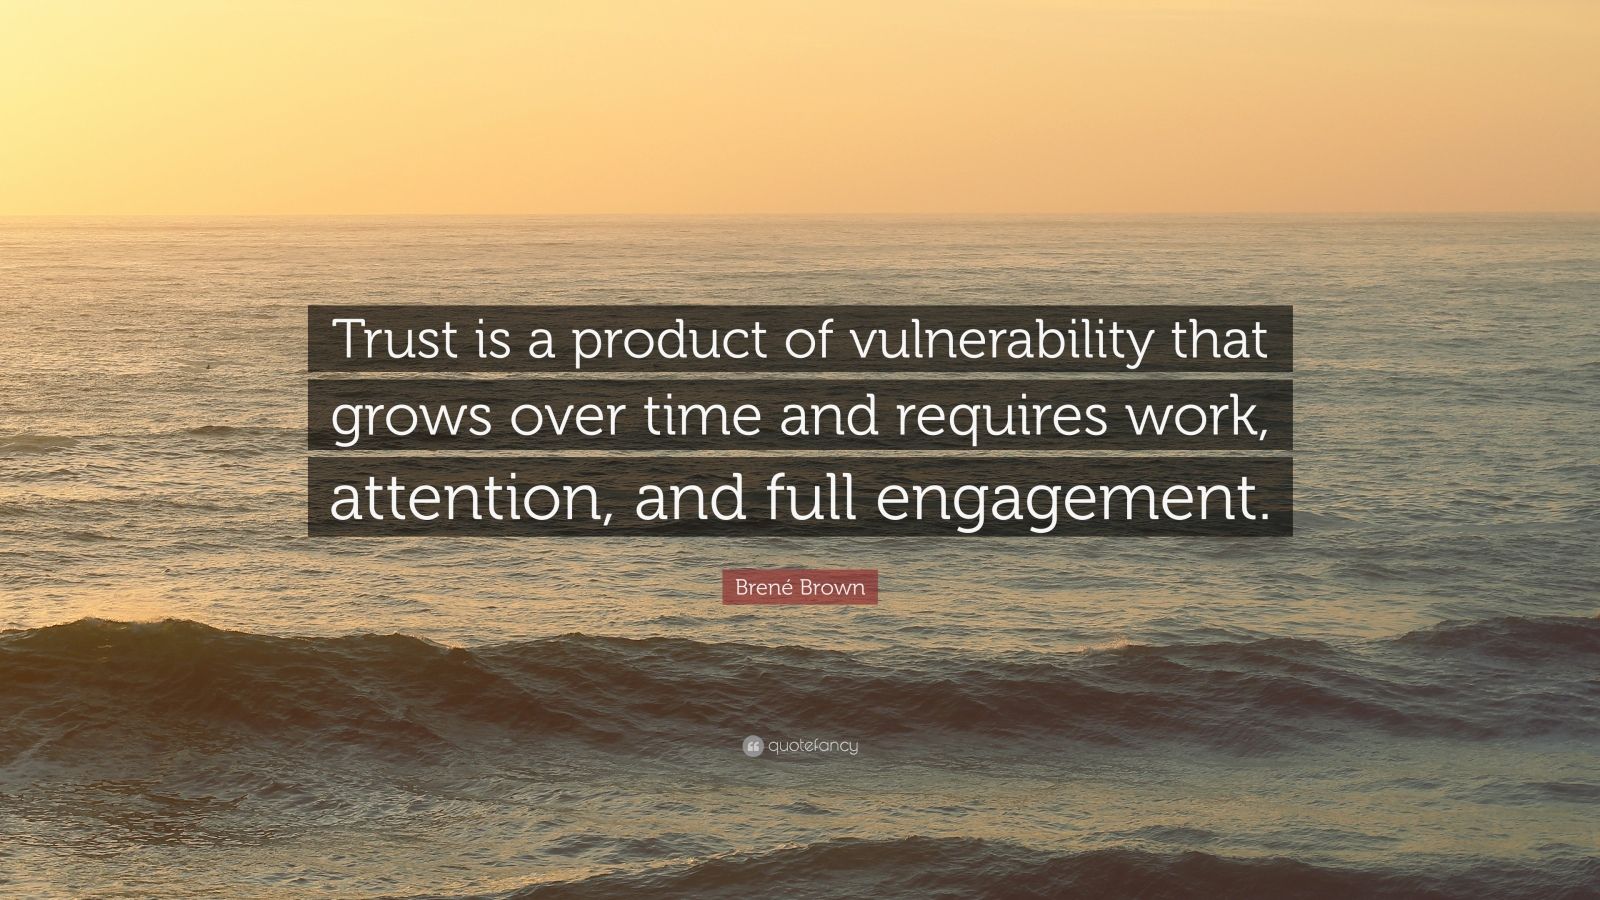 Brené Brown Quote: “Trust is a product of vulnerability that grows over ...